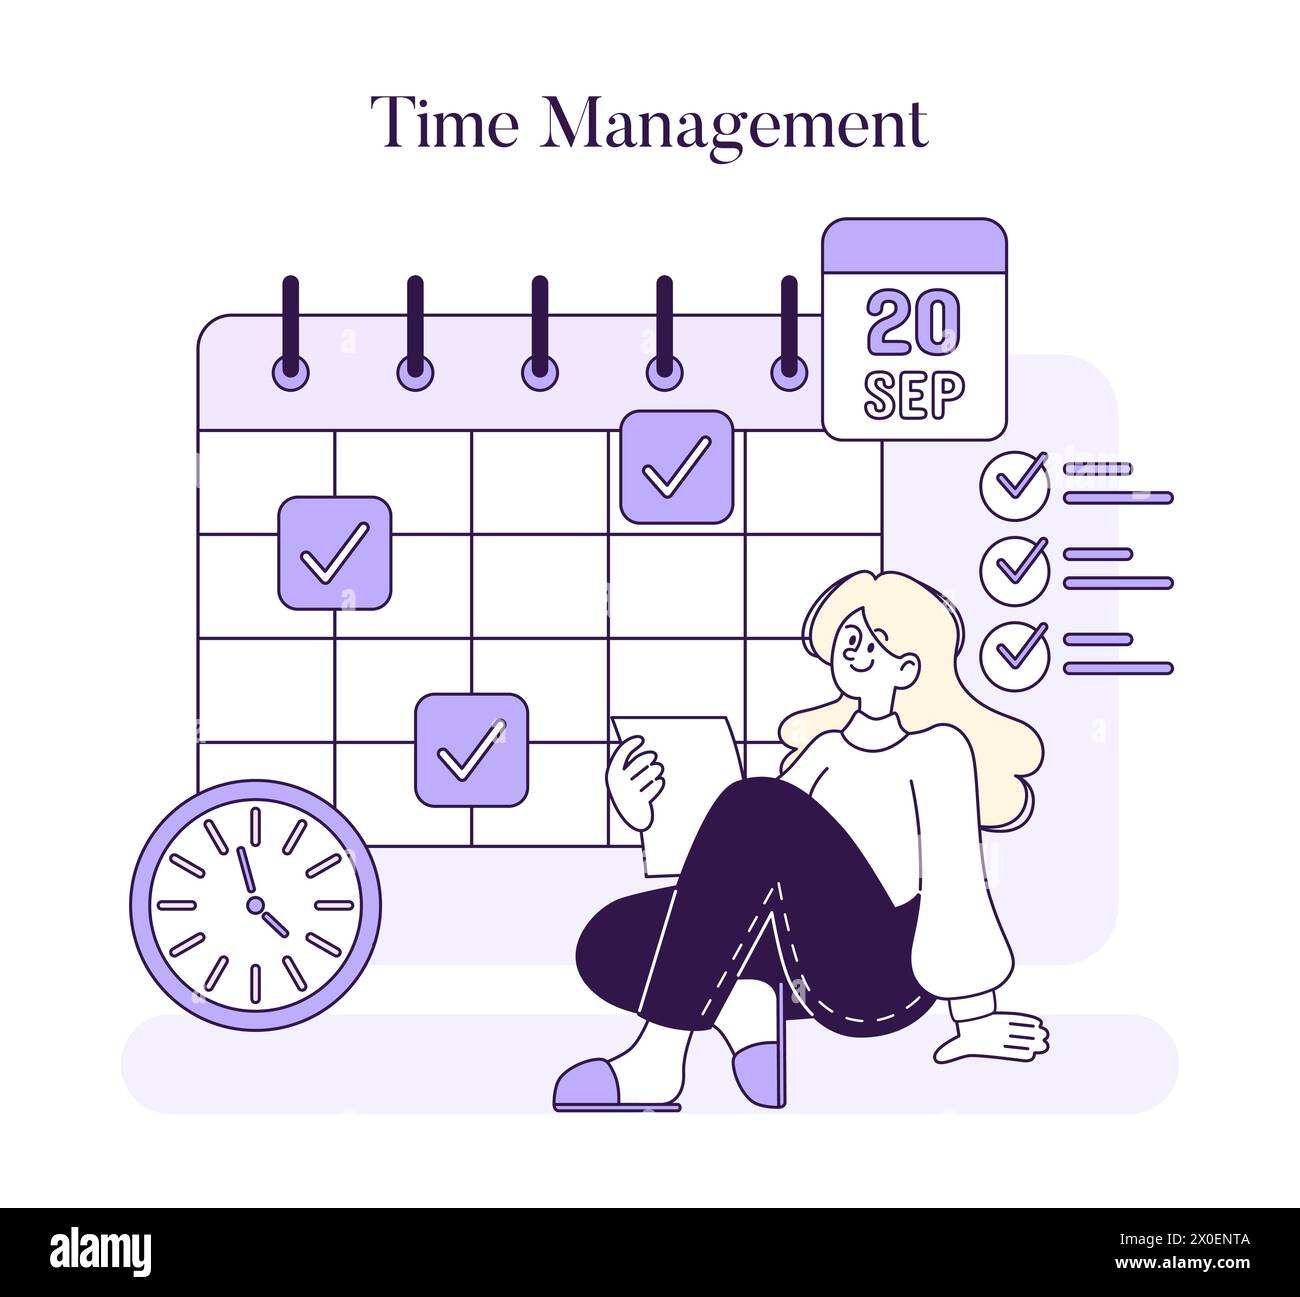 Time Management concept. An organized woman efficiently plans her schedule, marking tasks on a calendar, epitomizing structured time utilization. Vector illustration Stock Vector